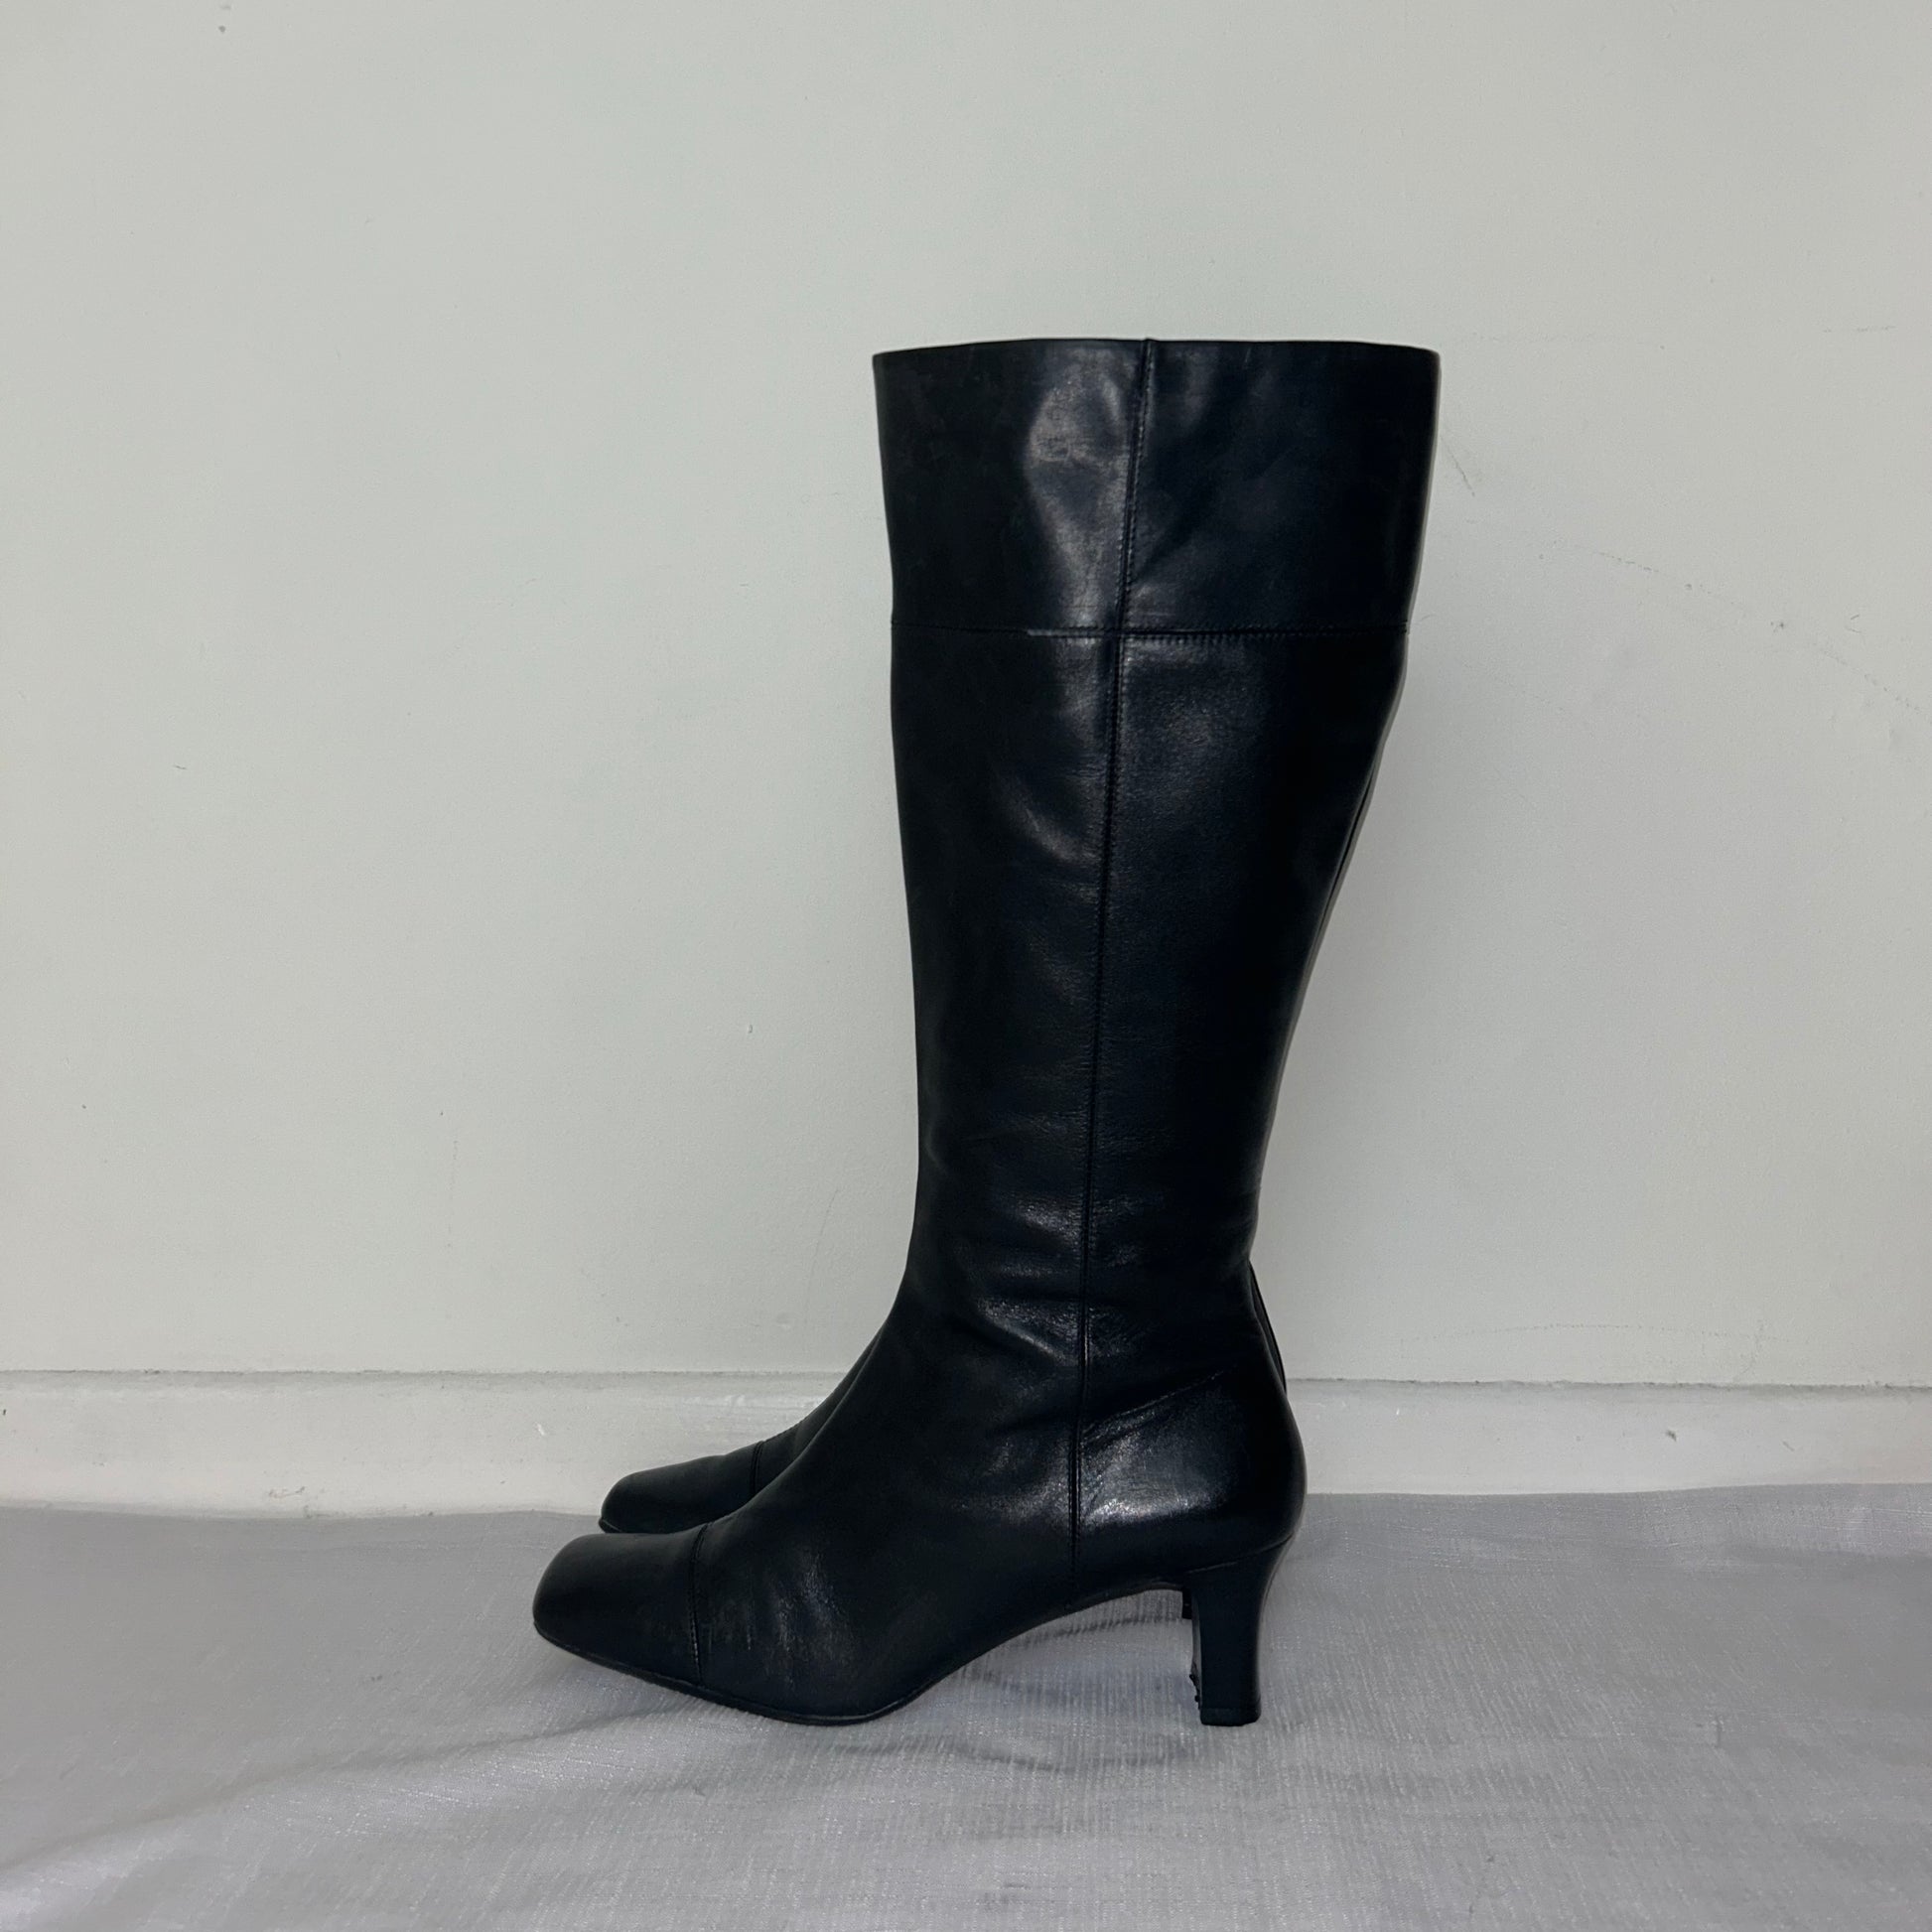 vintage black knee high leather boots shown on a white background